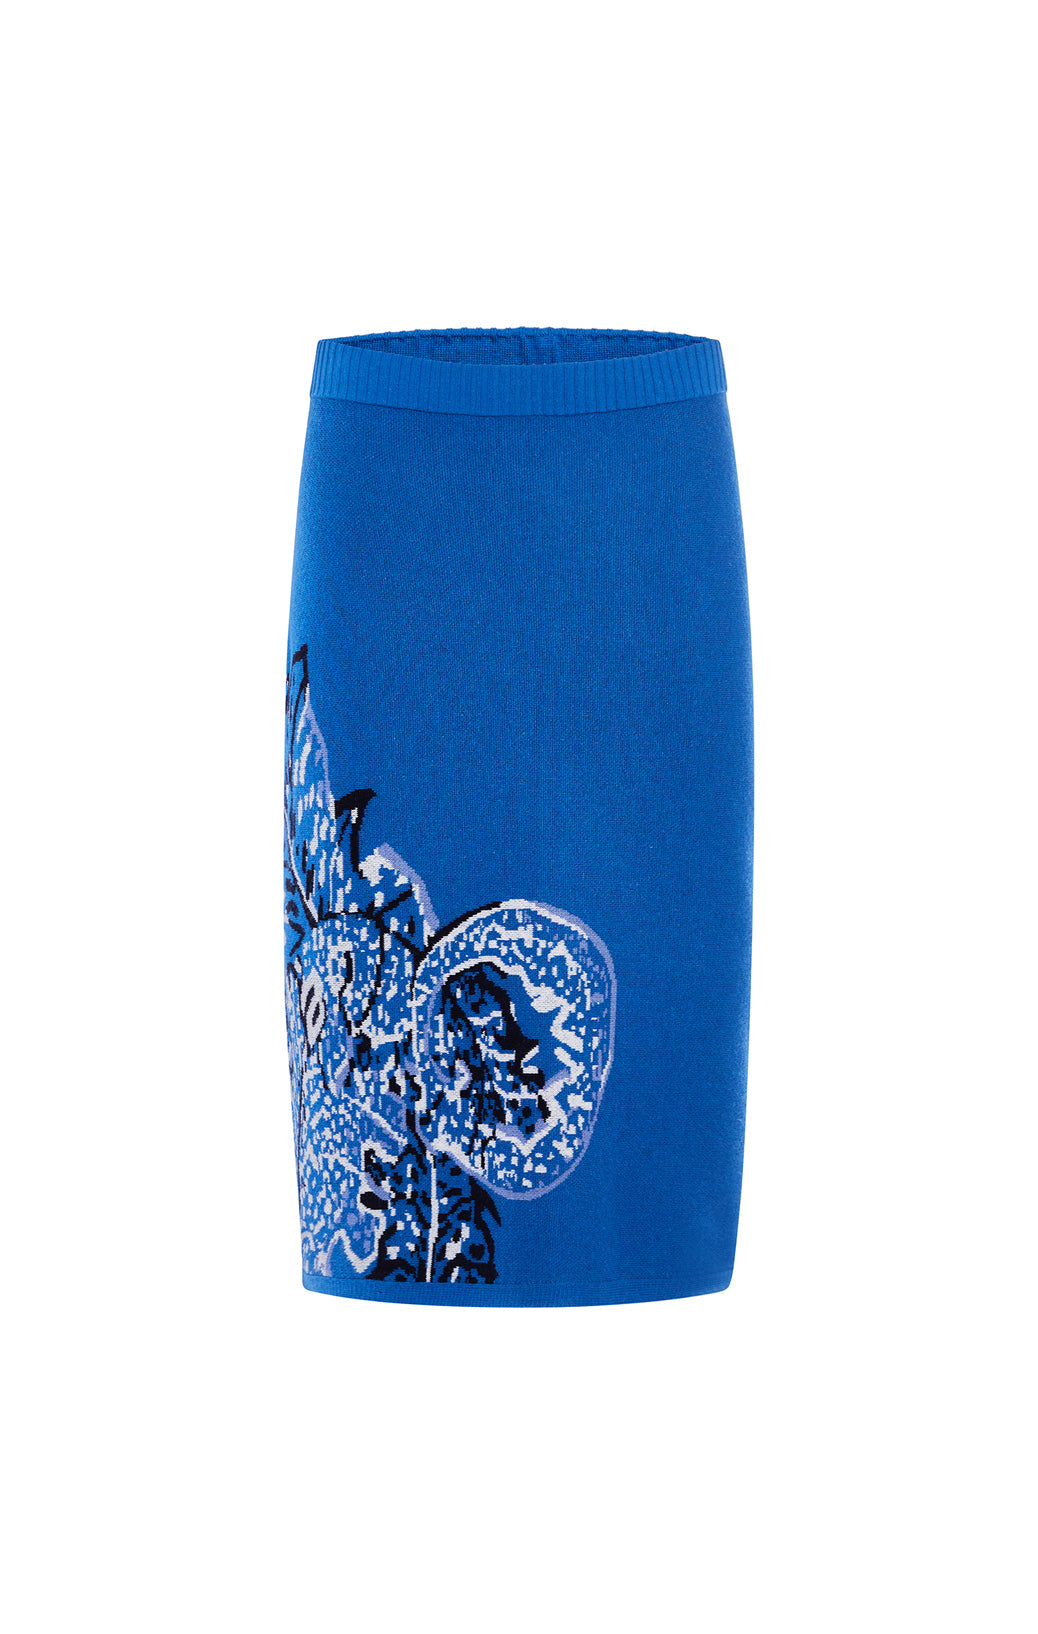 Oasis - Pleated Skirt In A Moroccan Foliage Print - Product Image